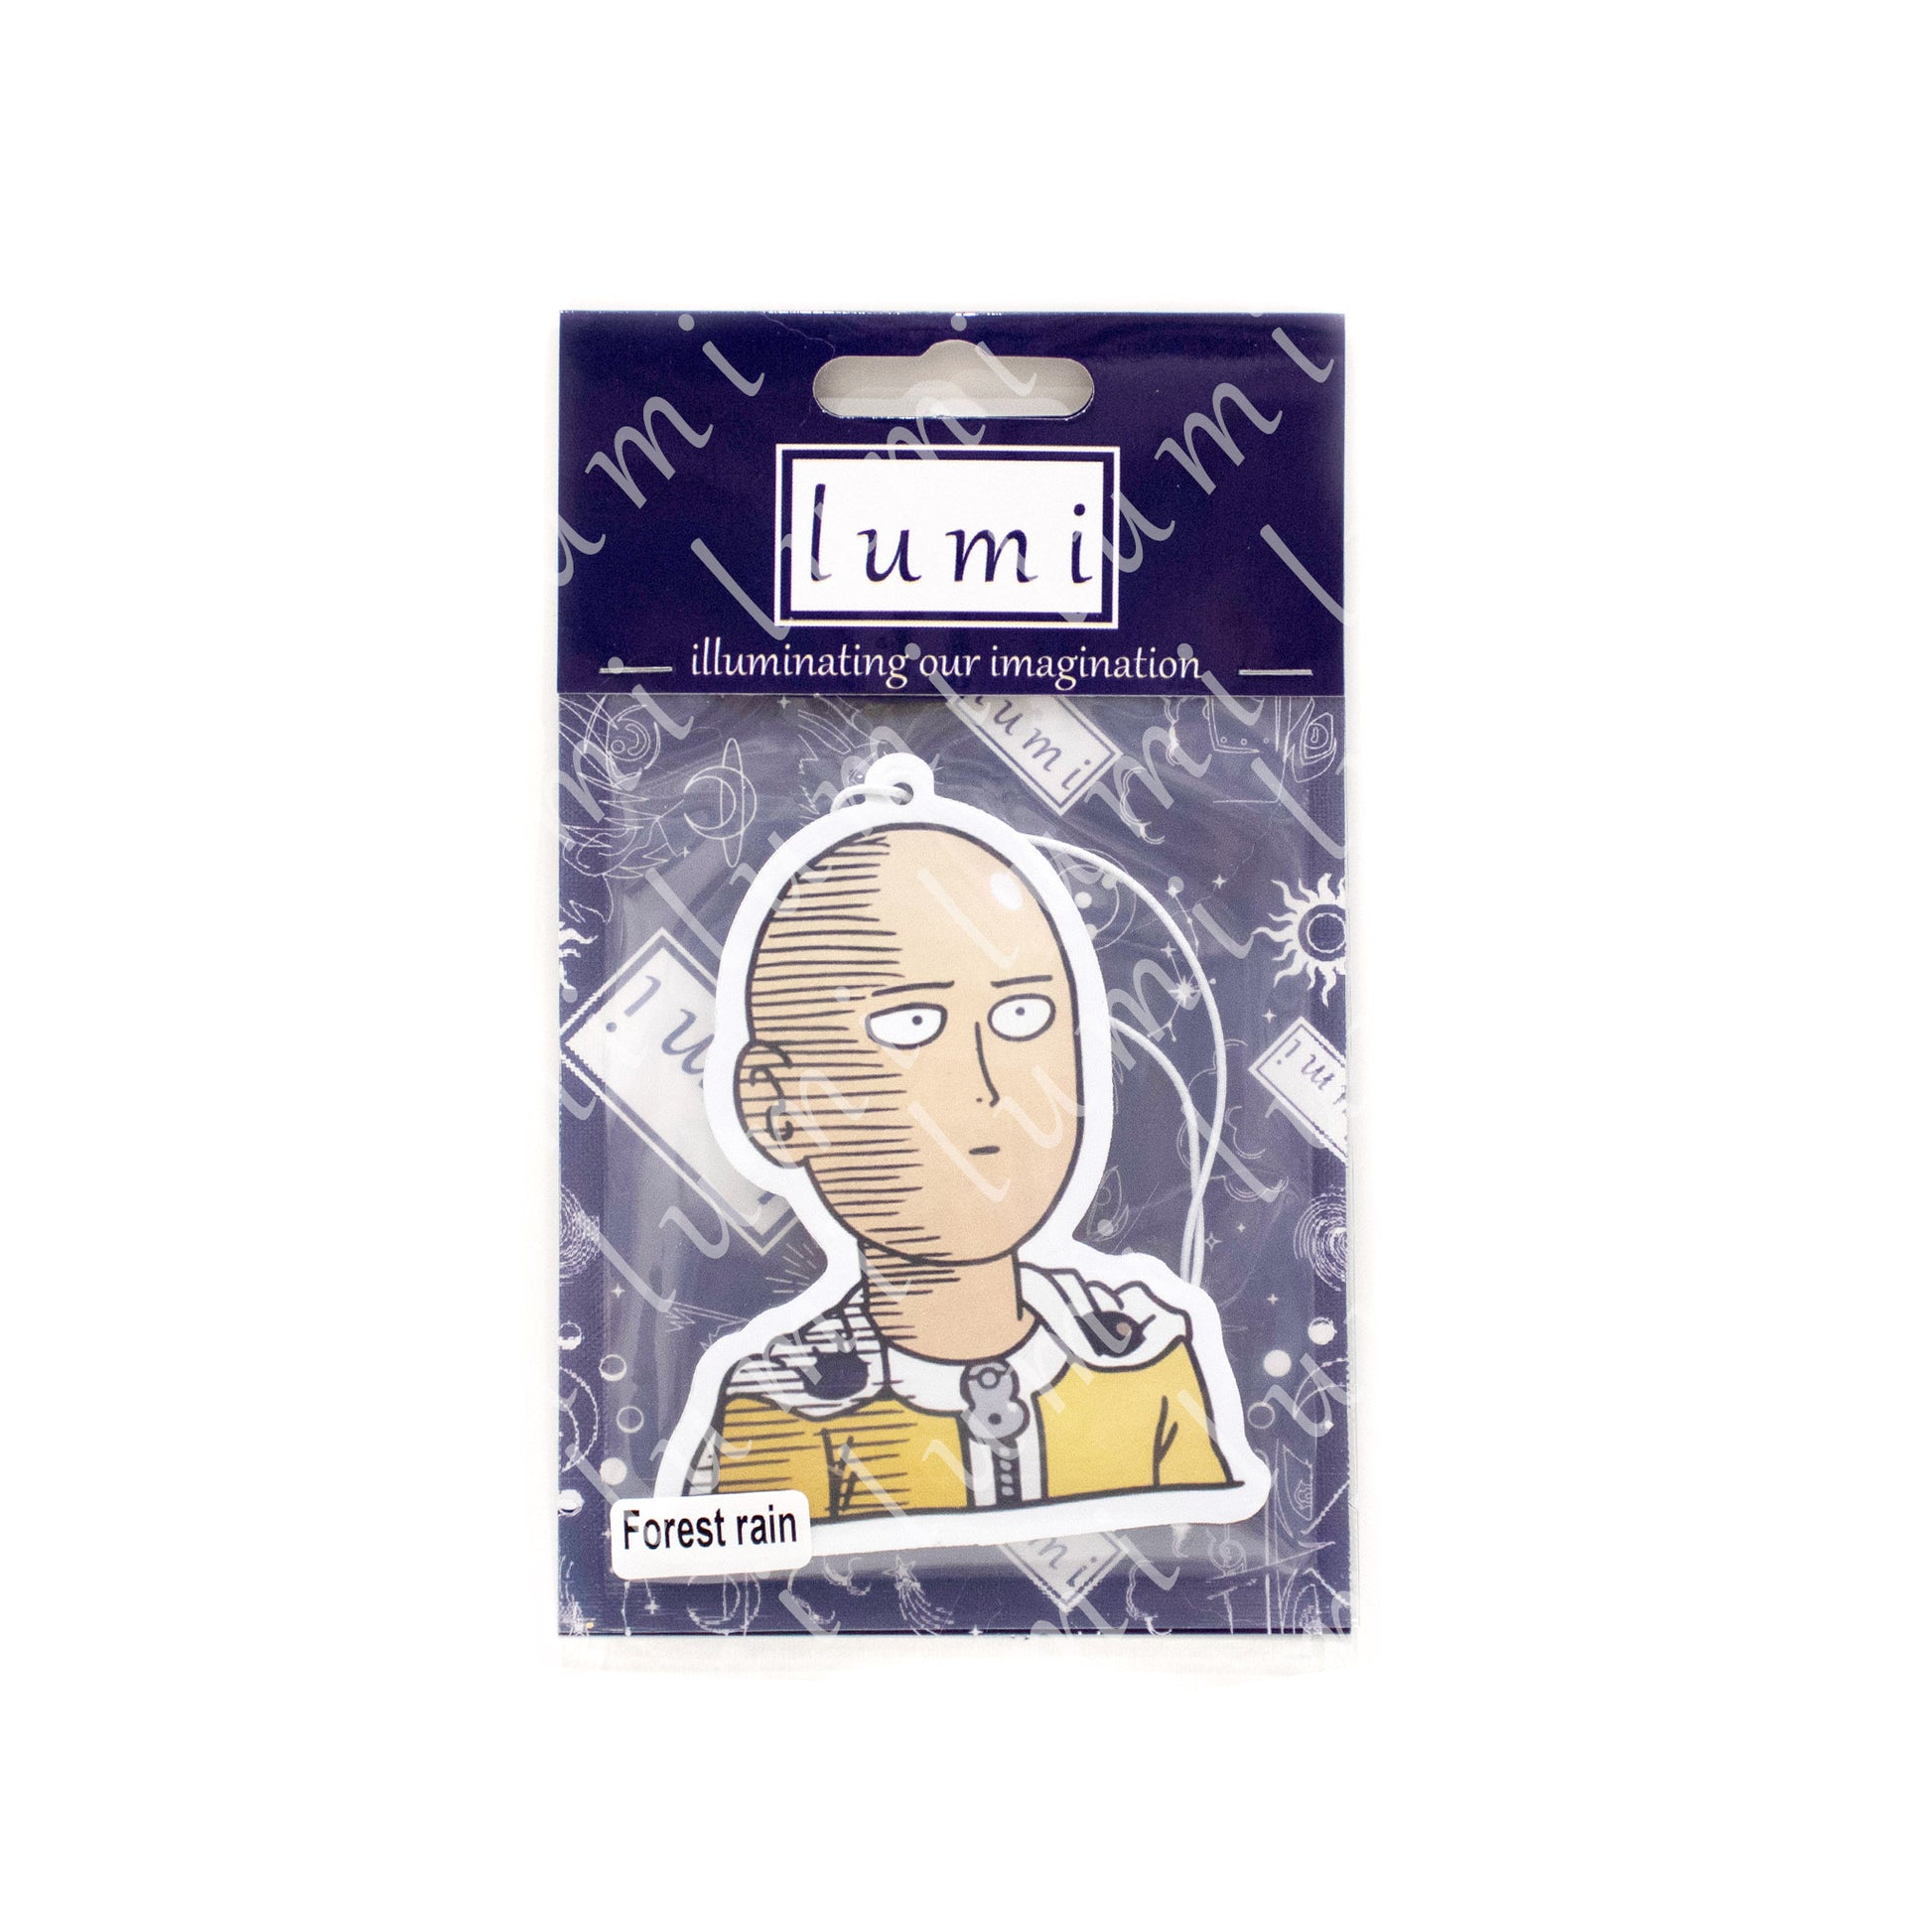 Image of Saitama from One Punch Man on an air freshener, featuring a bold and vibrant design.